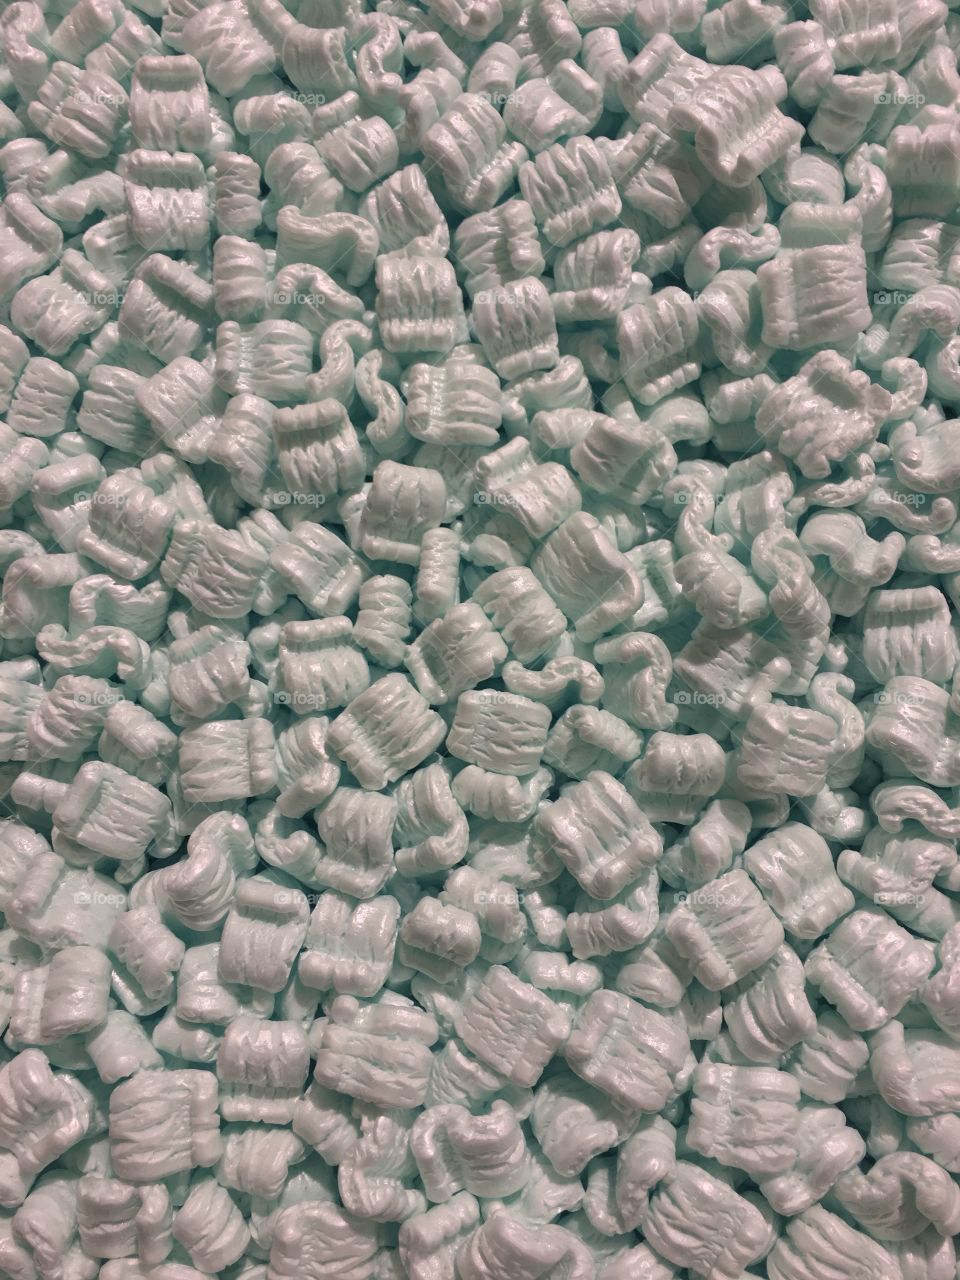 Packing peanuts 